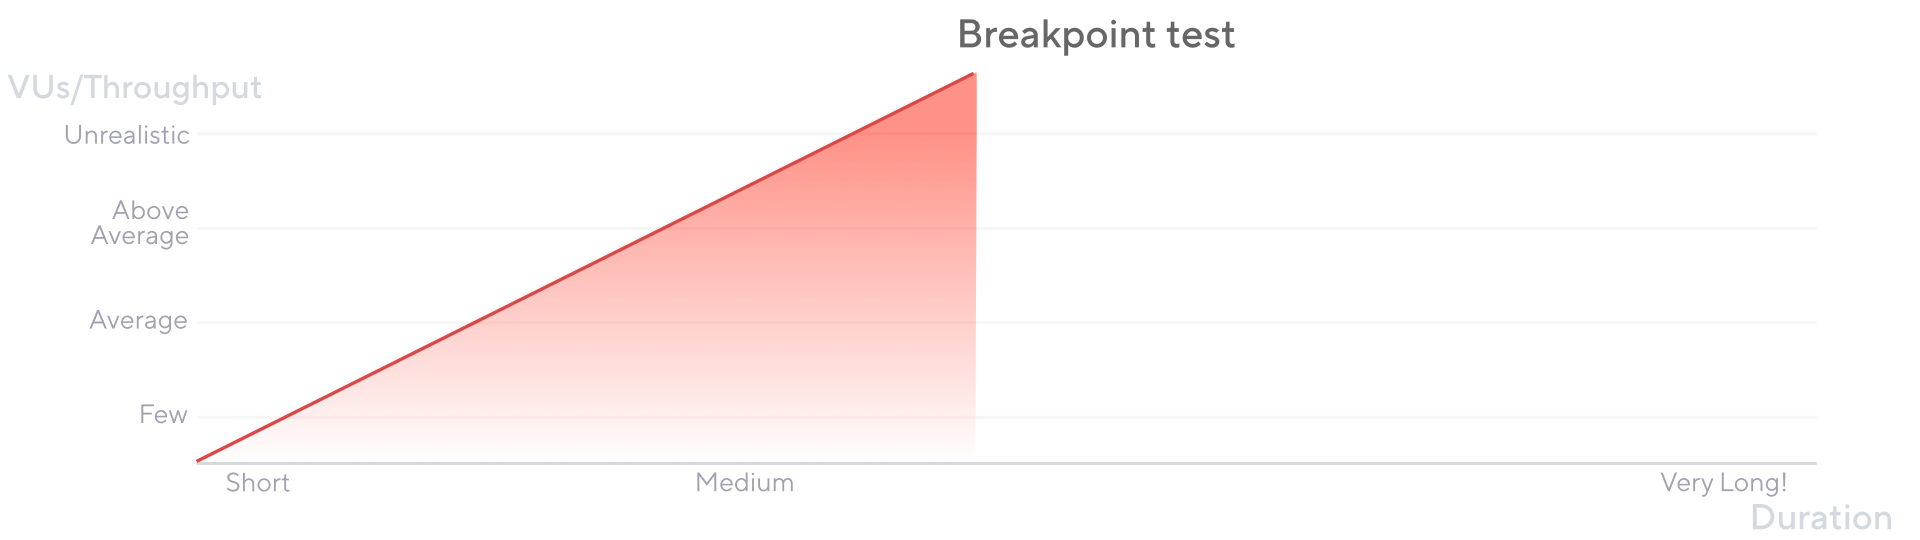 Chart showing breakpoint testing VUs and duration in Grafana k6